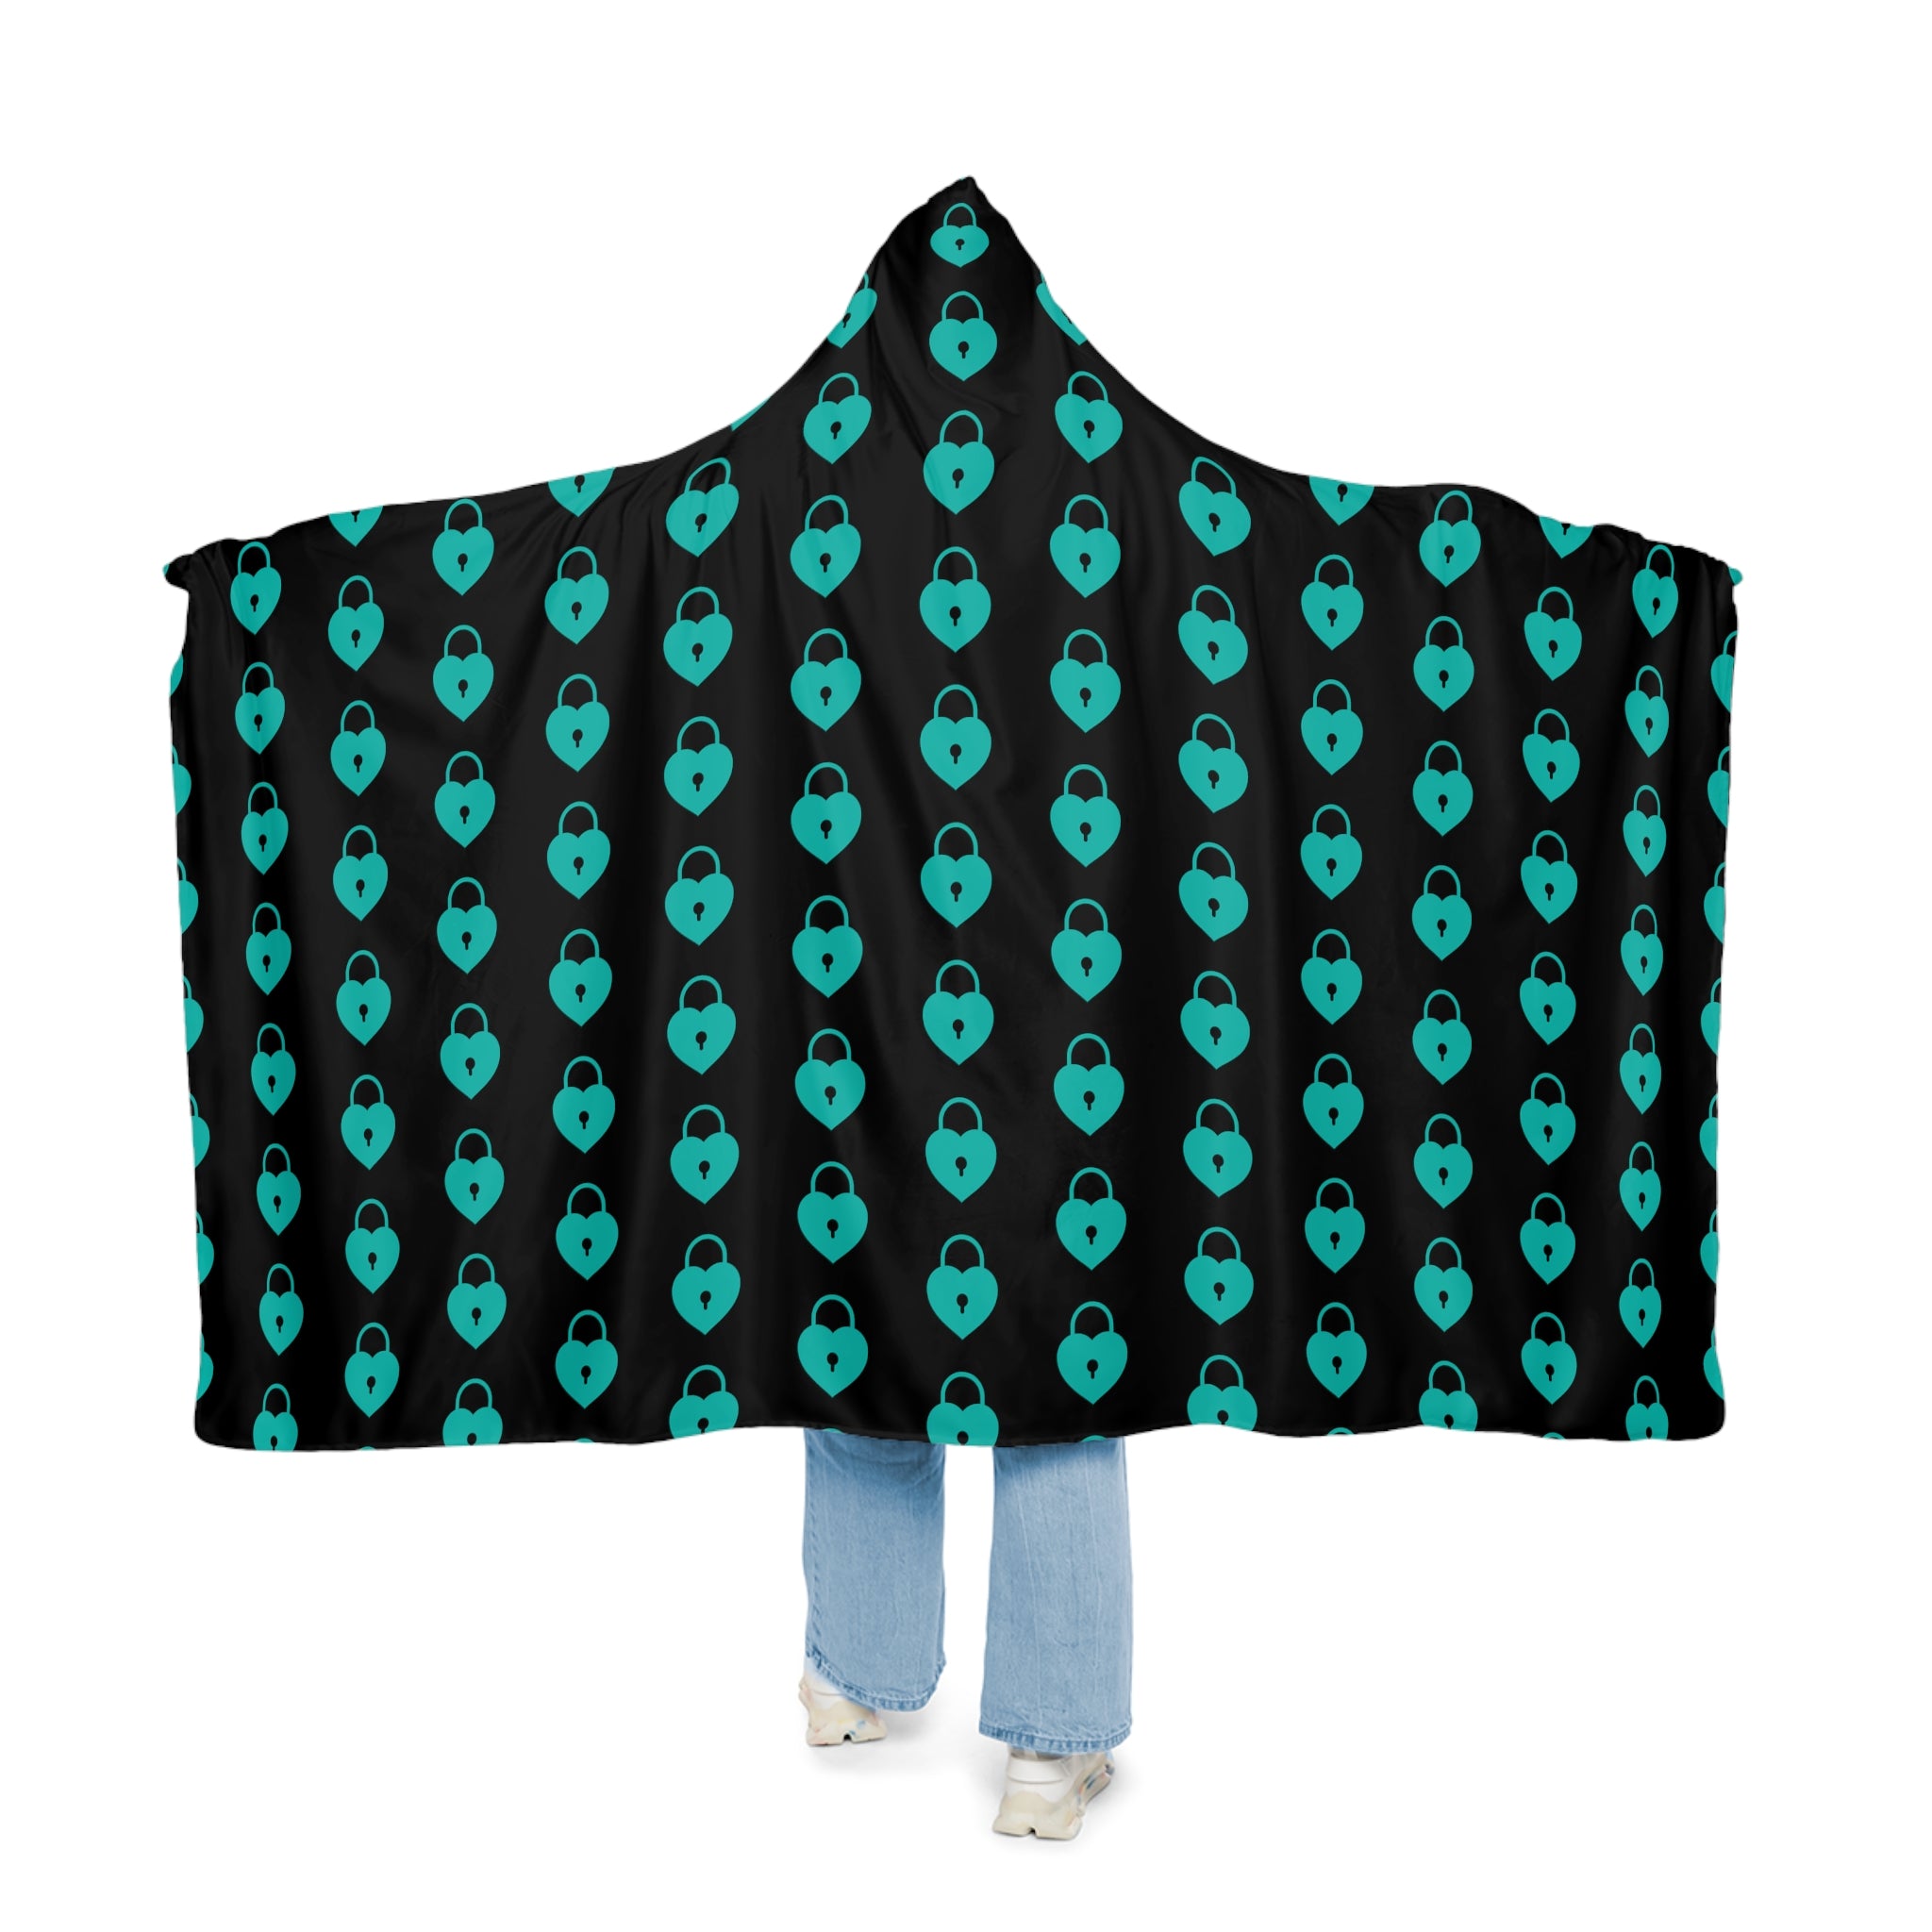 At Home Collection Large Blue Lock Pattern Black Snuggle Blanket, Hooded Sherpa, Oversized Hooded Cape All Over Prints 80-55-Microfiber-Fleece The Middle Aged Groove